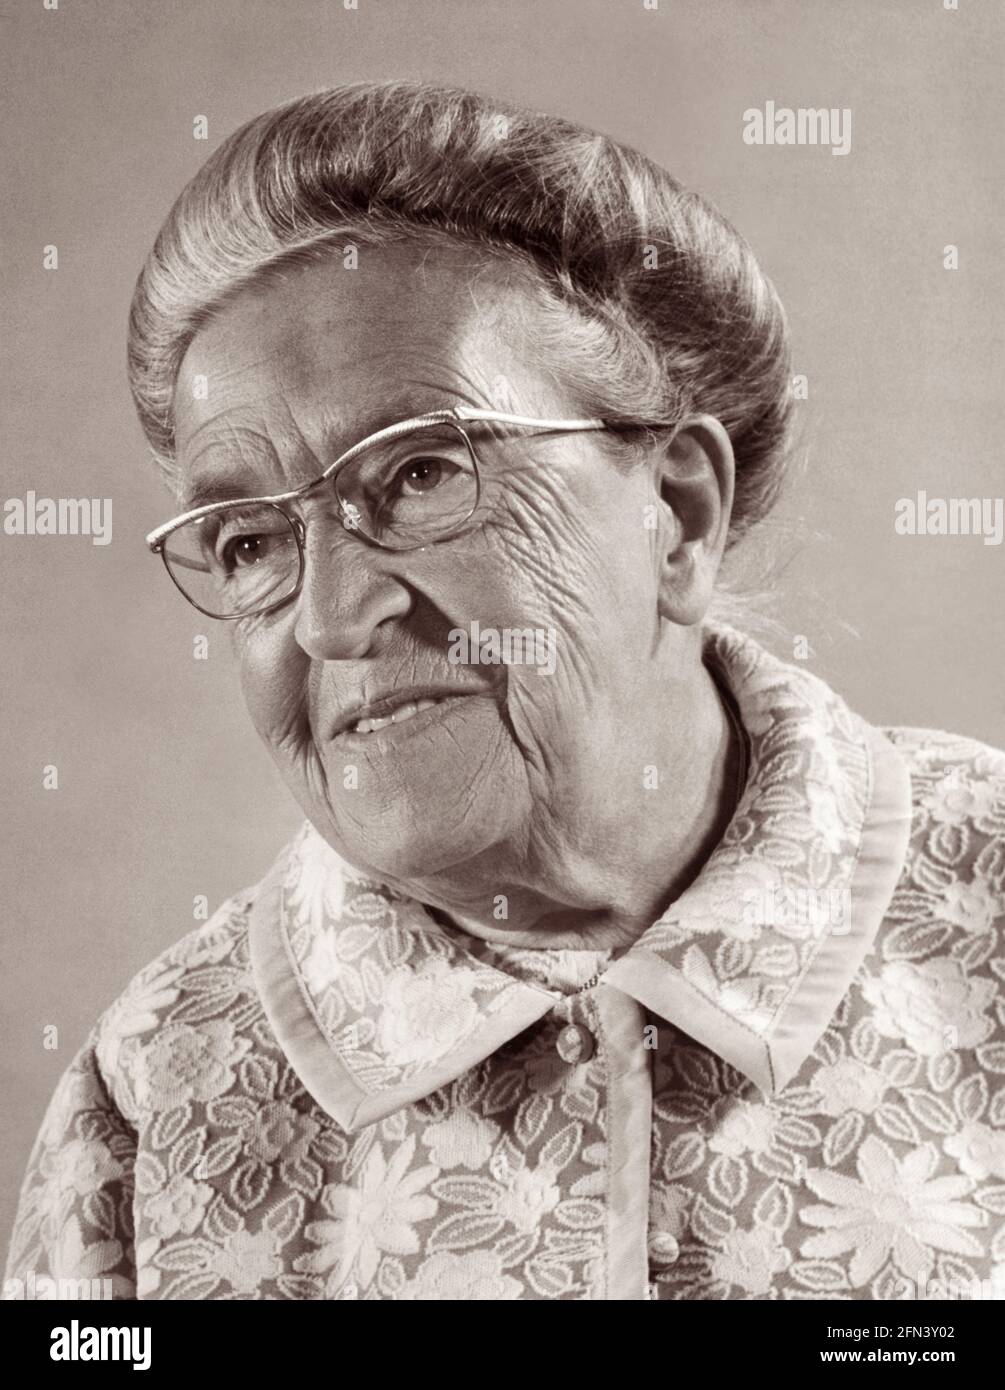 Corrie ten Boom (1892-1983) was a Dutch watchmaker and Christian arrested by the Nazis for hiding Jews during World War II. She was imprisoned at Scheveningen when resistance materials and extra ration cards were found in her home. After trial, she was moved to two concentration camps. Her eventual release from Ravensbrück concentration camp (she was later told) was the result of a clerical error and a week later the other women in her age group were sent to the gas chambers. Her 1971 book and the 1975 movie, The Hiding Place, feature her family's work in hiding refugees during World War II. Stock Photo